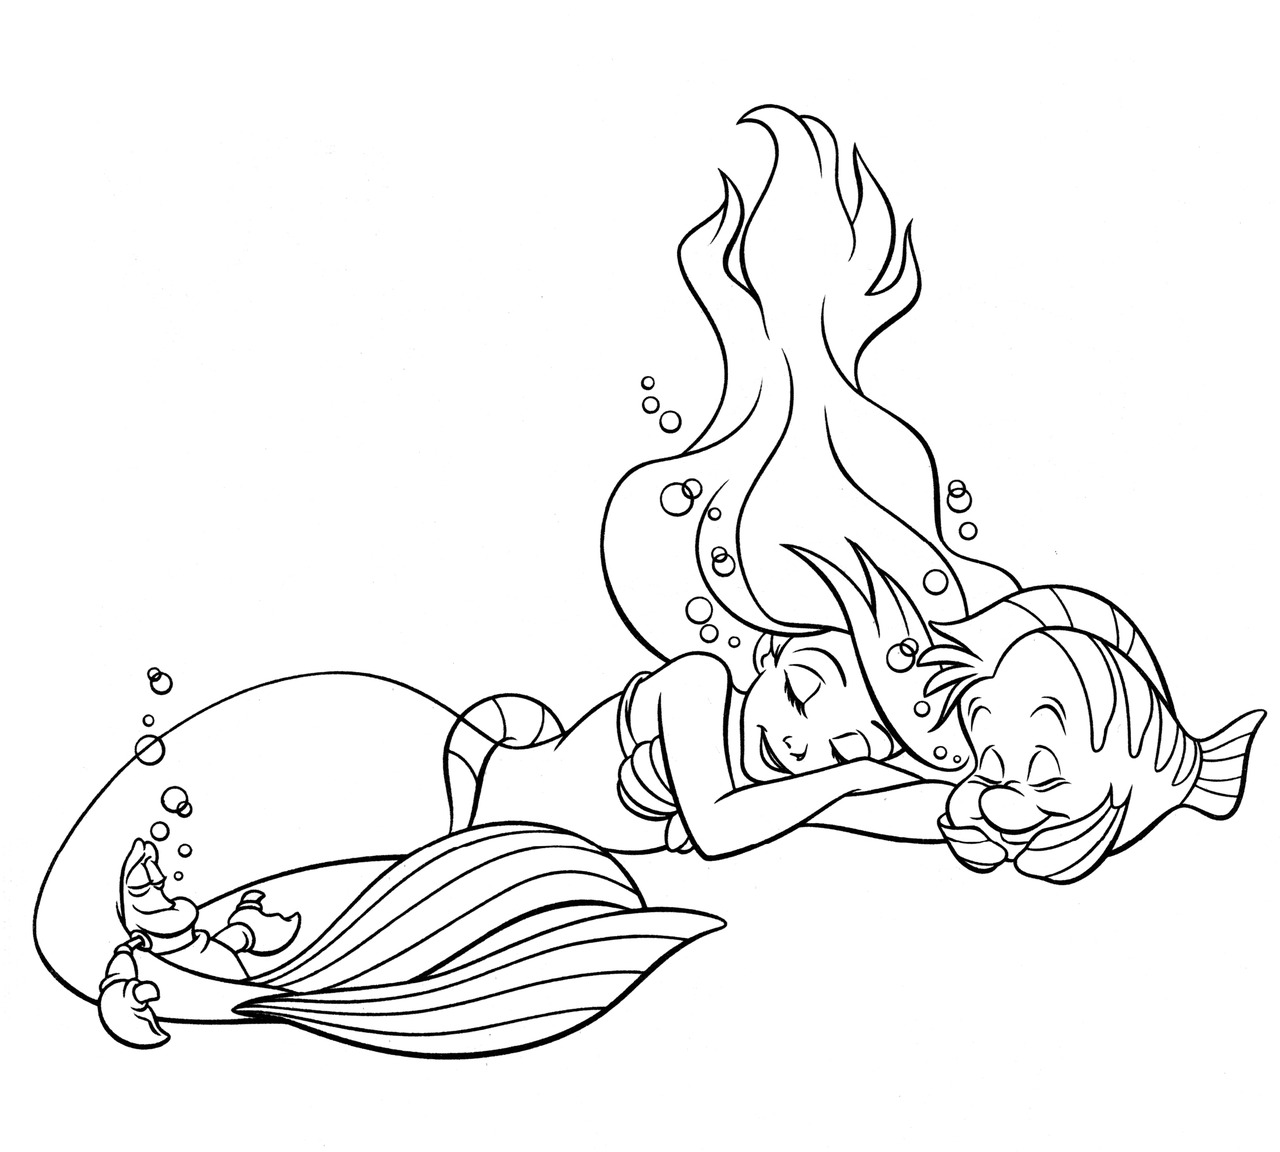 disney princess ariel in a dress coloring pages